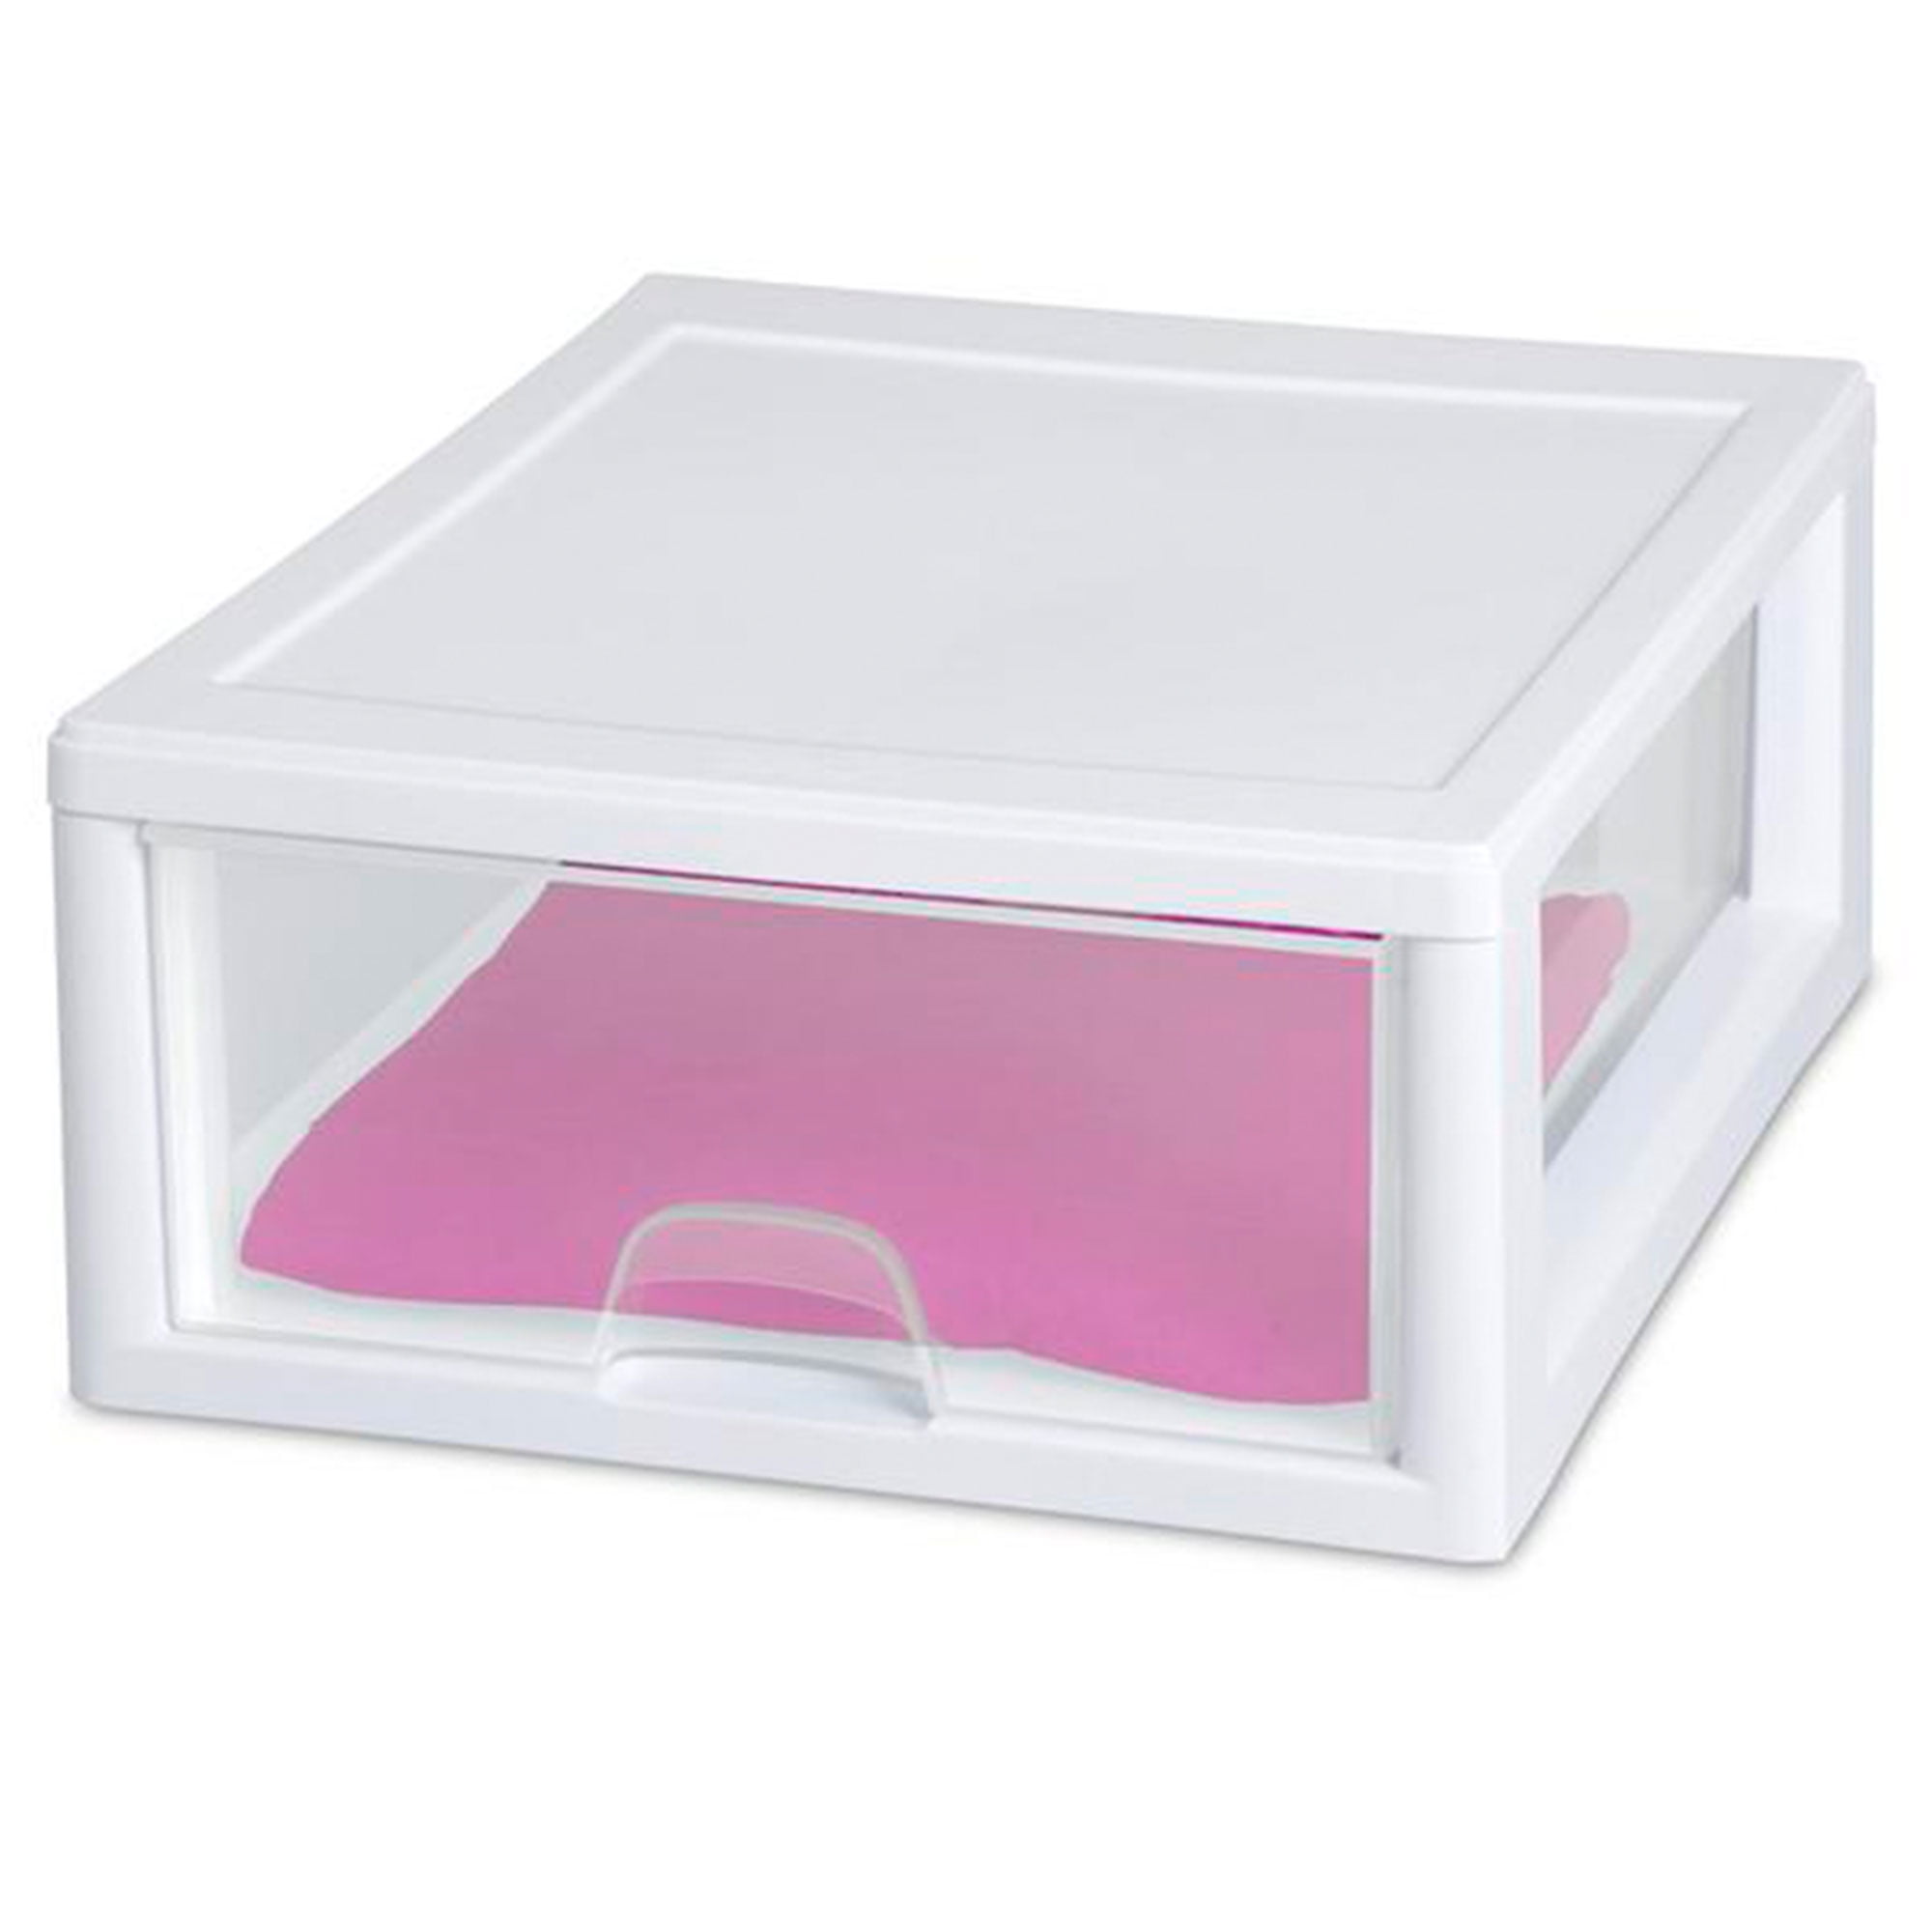 Sterilite 16 Quart Clear Plastic Stacking Storage Drawer Container Box (6  Pack), 6pk - Harris Teeter